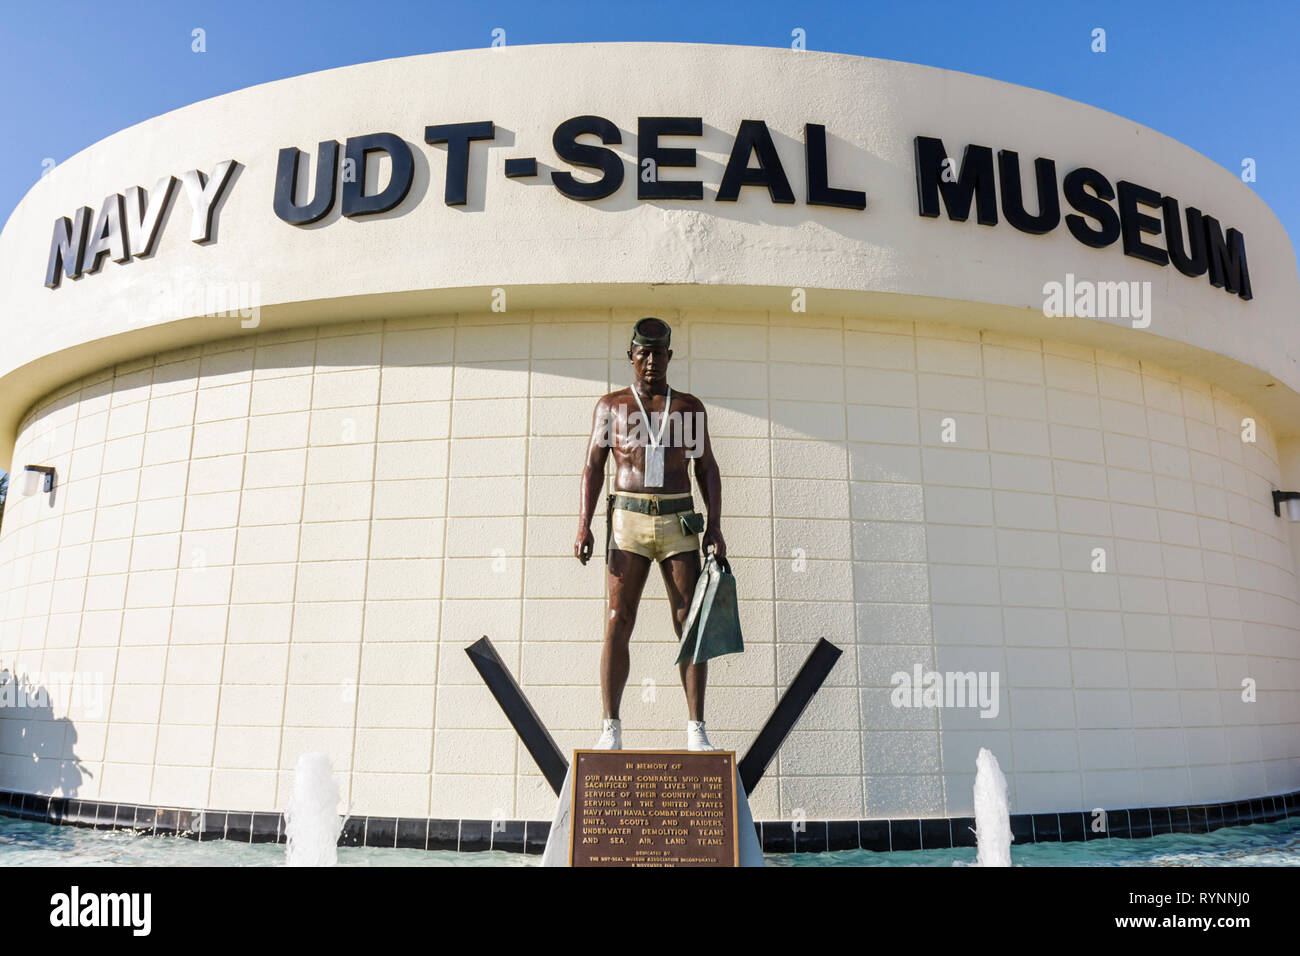 Florida Saint St. Lucie County,Fort Ft. Pierce,A1A,North Hutchinson Barrier Island,National Navy UDT SEAL Museum,SEAL,Unconventional Warfare,military, Stock Photo